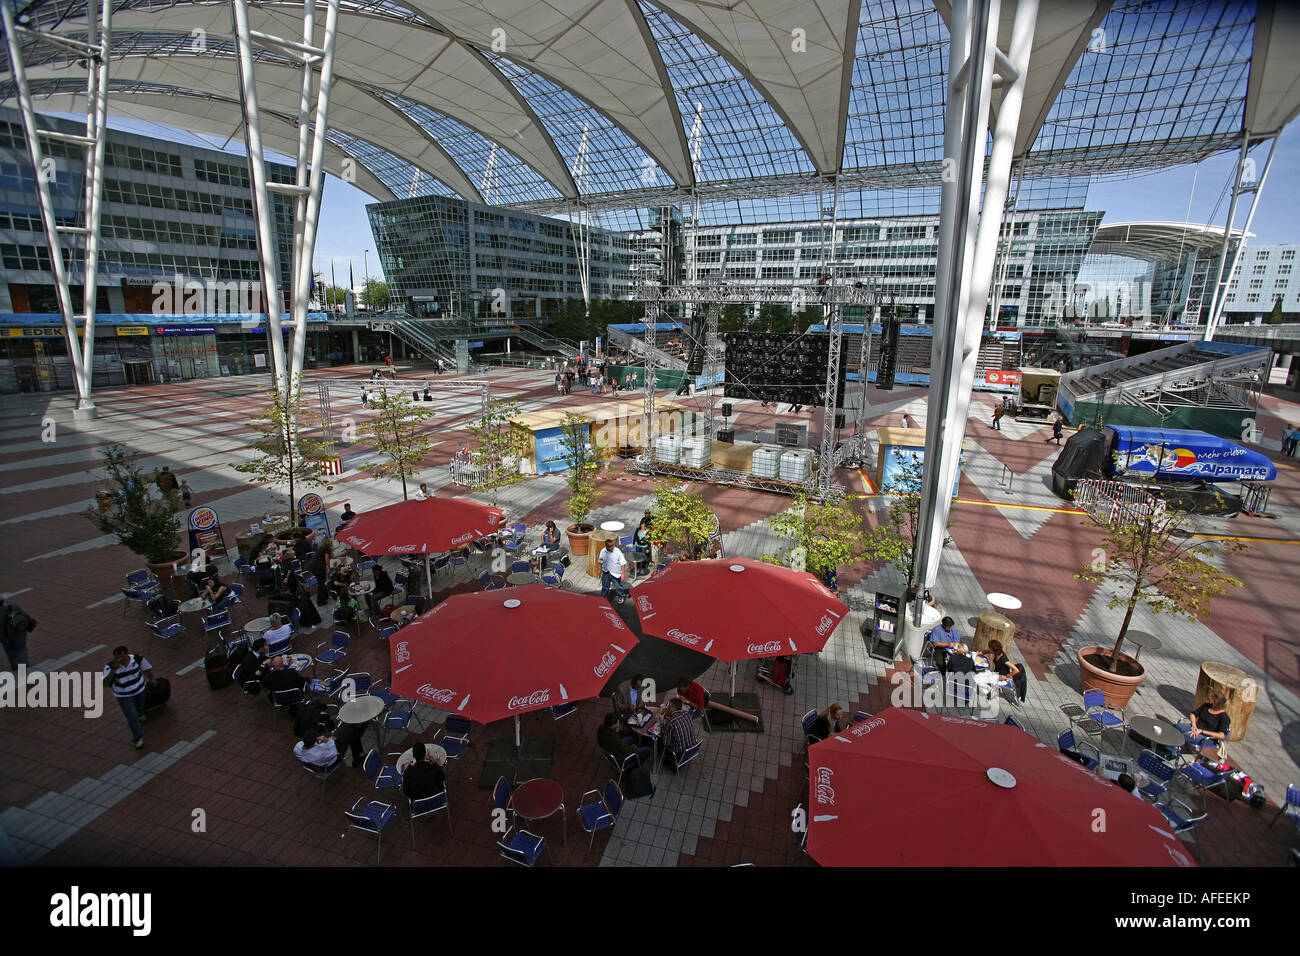 Illustration Airport Terminal 2: Cafe at Munich Airport building with futuristic architecture Stock Photo